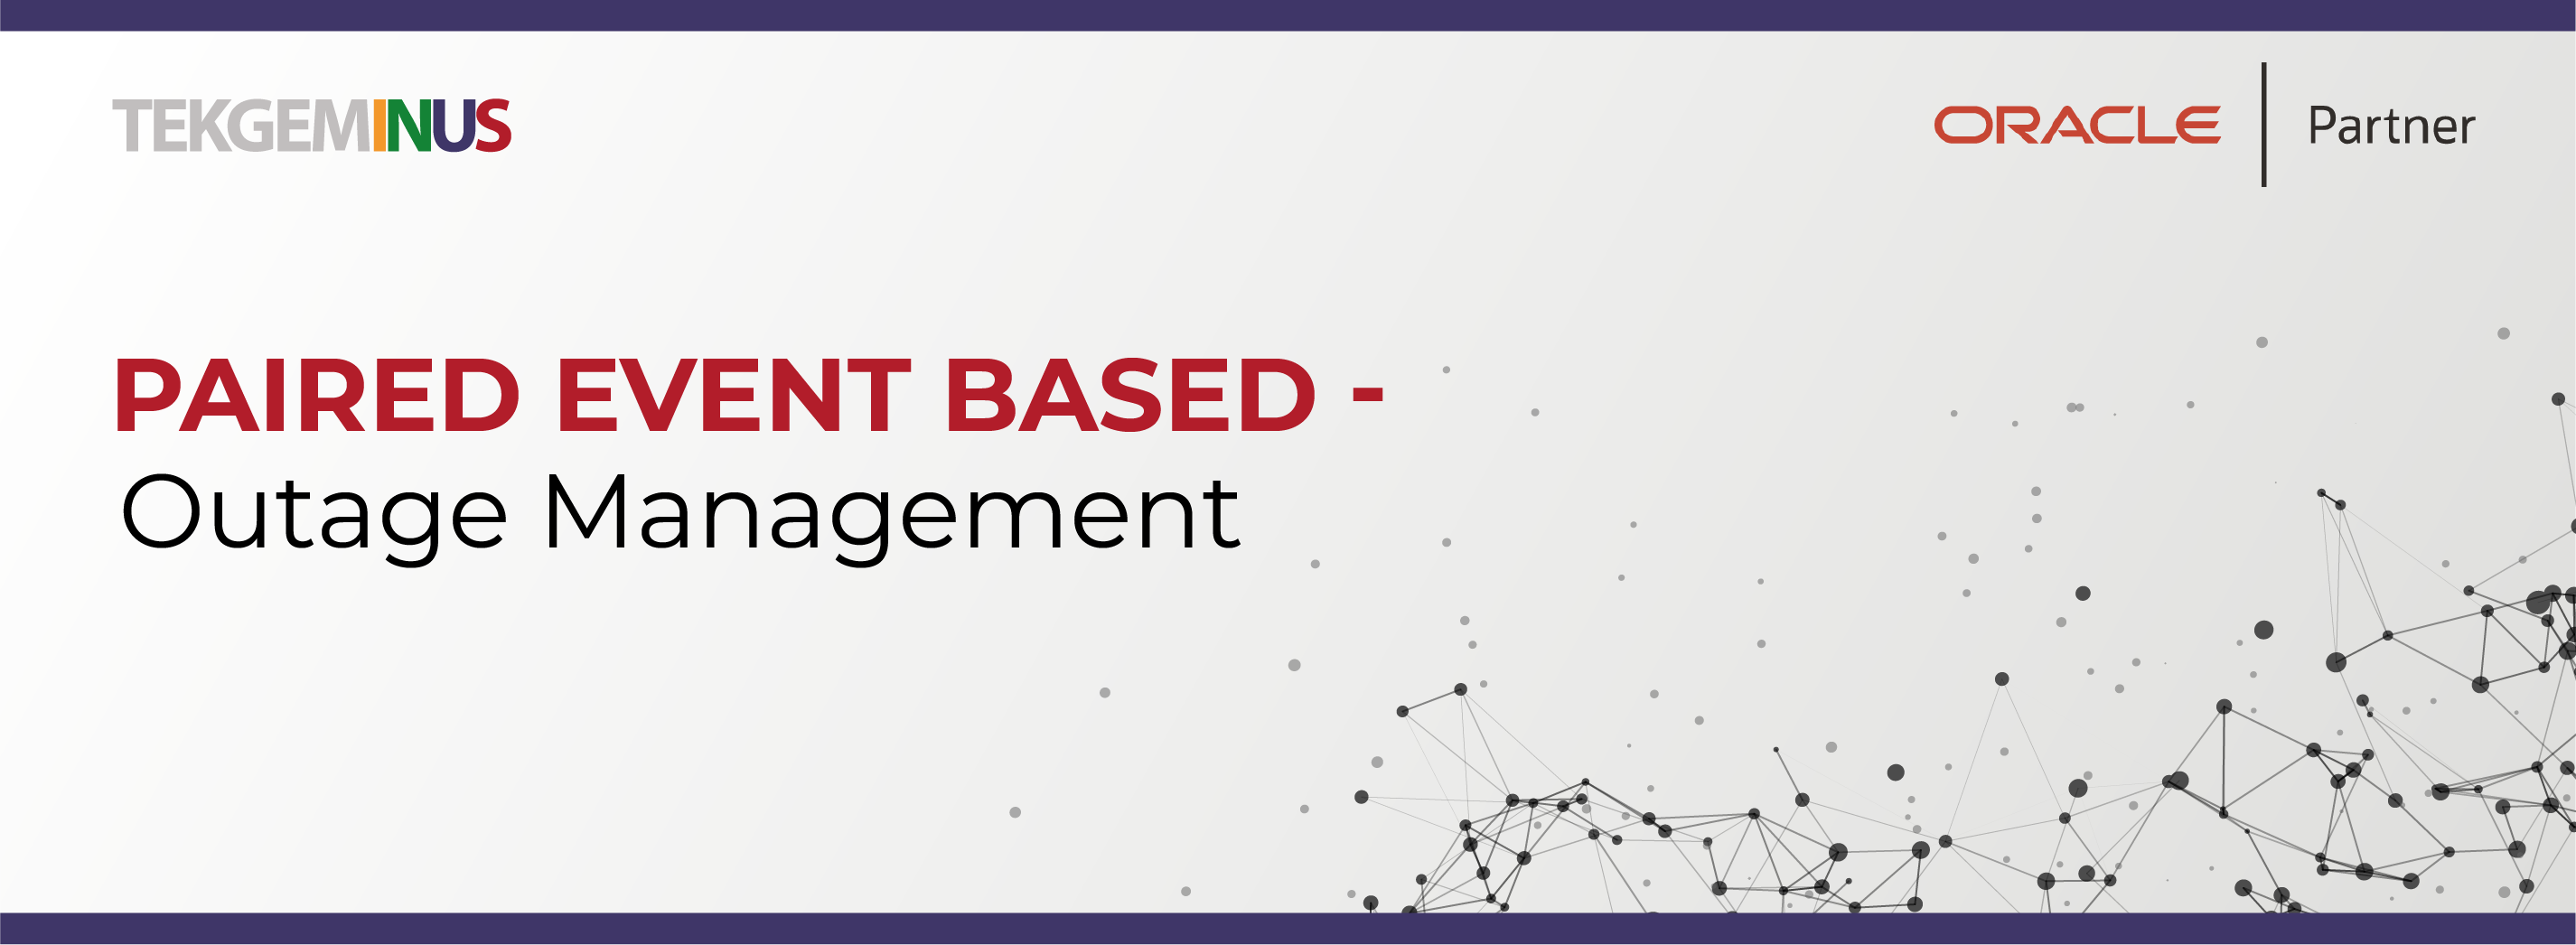 Paired Event Based - Outage Management